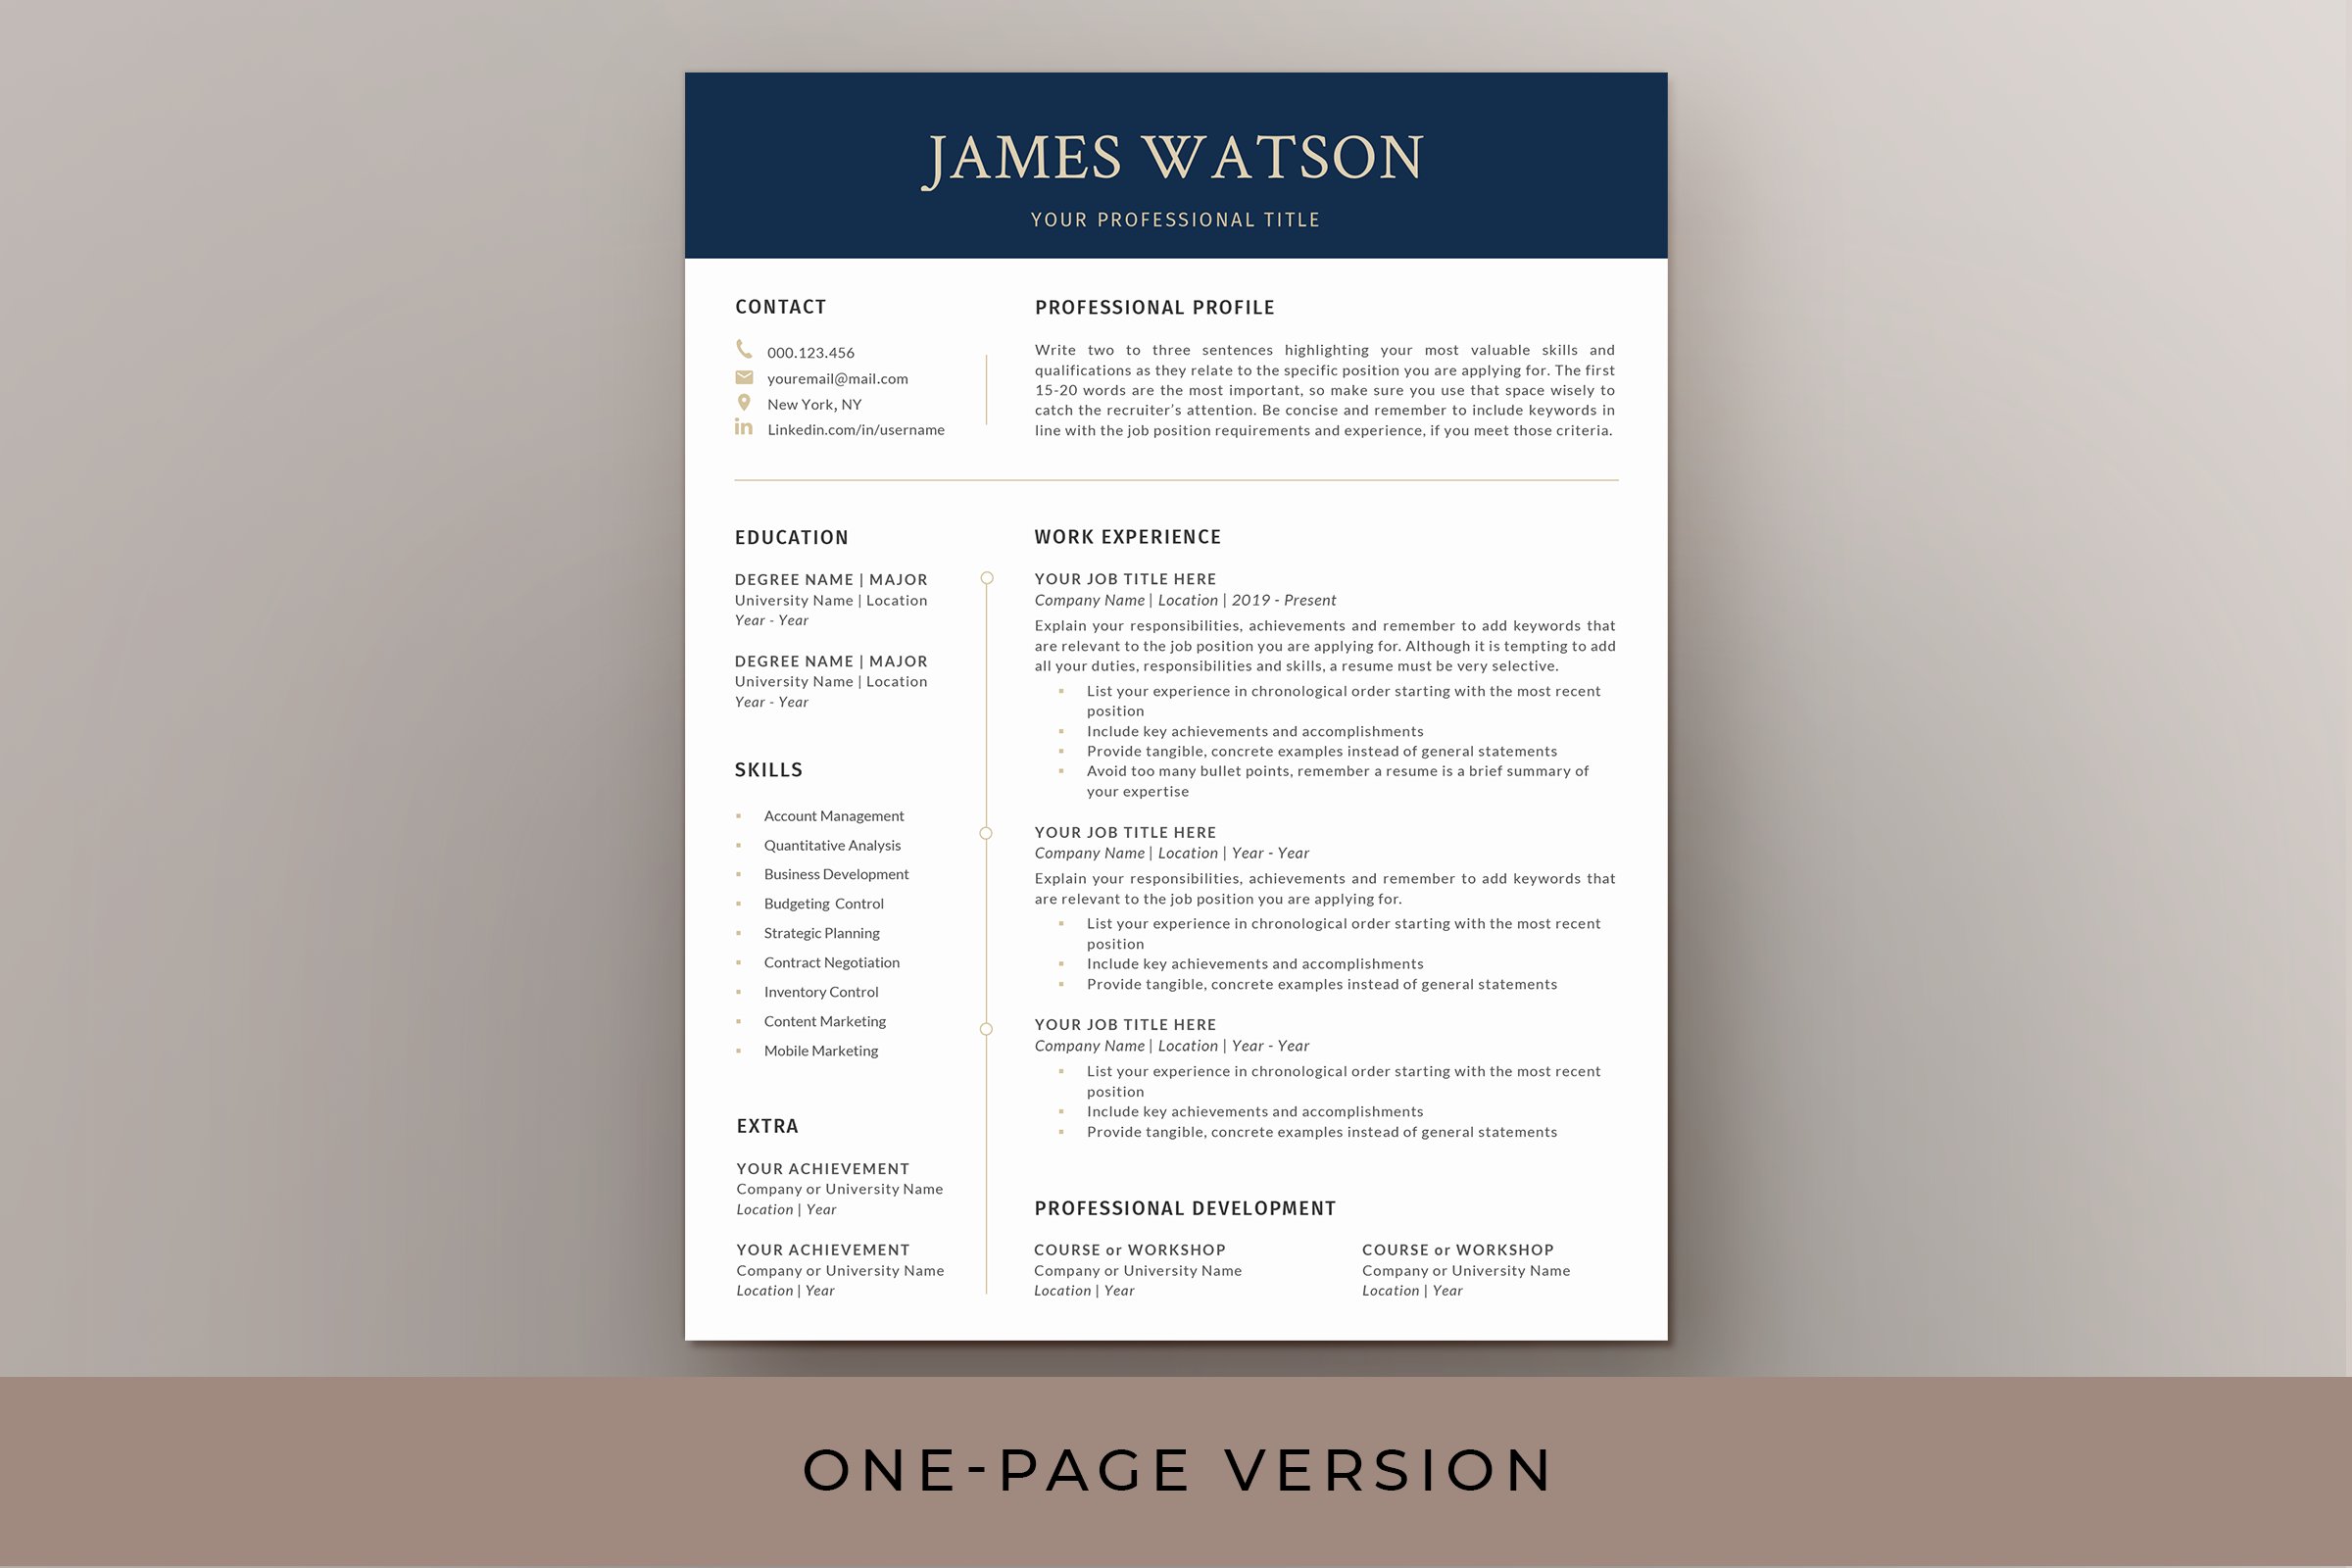 Executive Resume & Cover Letter Word preview image.